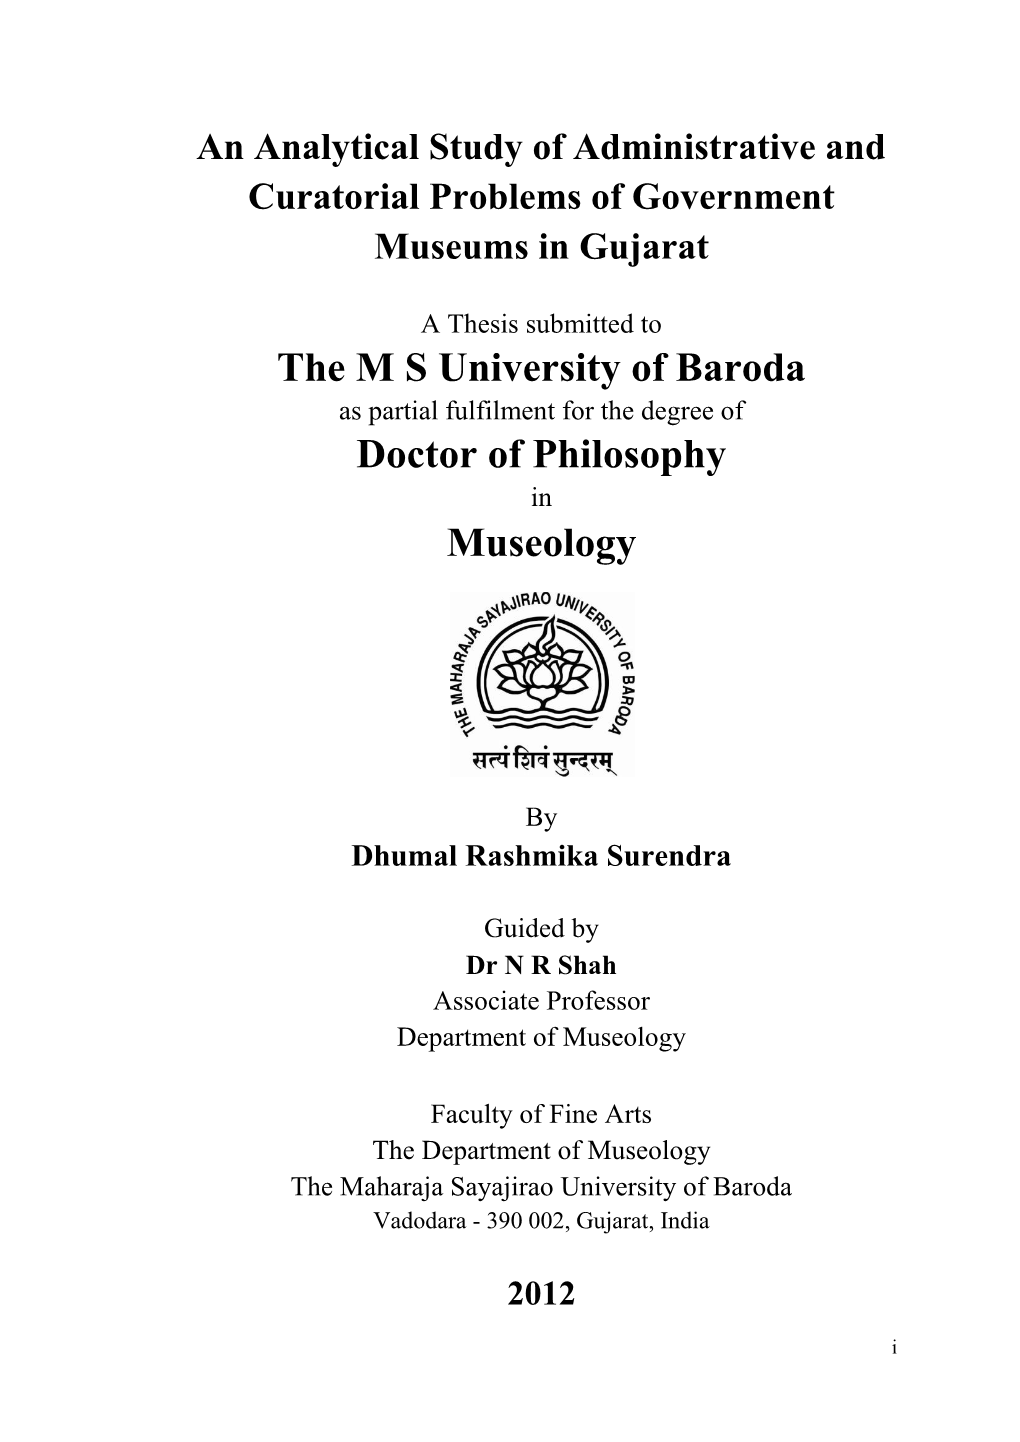 The M S University of Baroda Doctor of Philosophy Museology